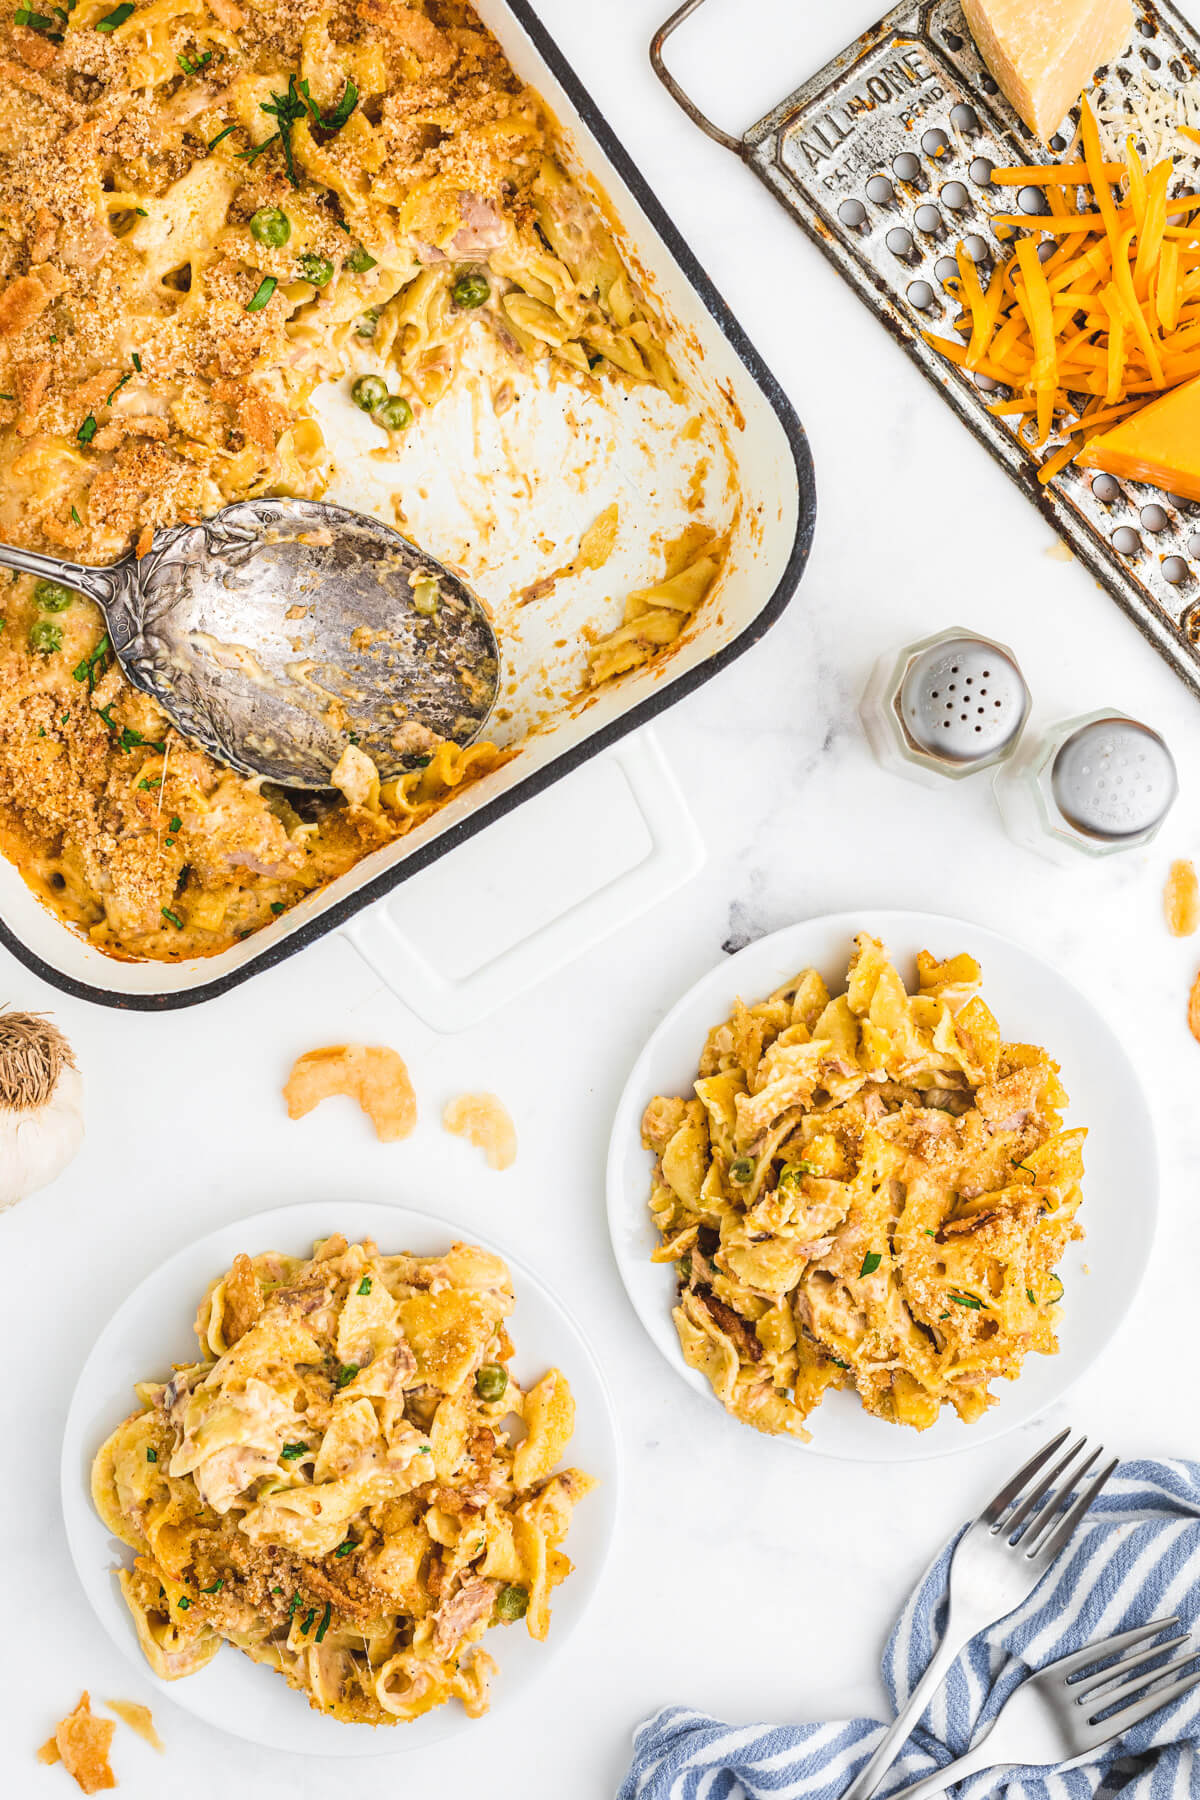 A white enamel baking pan half full of golden baked, crumb topped Tuna Noodle Casserole beside two full white plates.